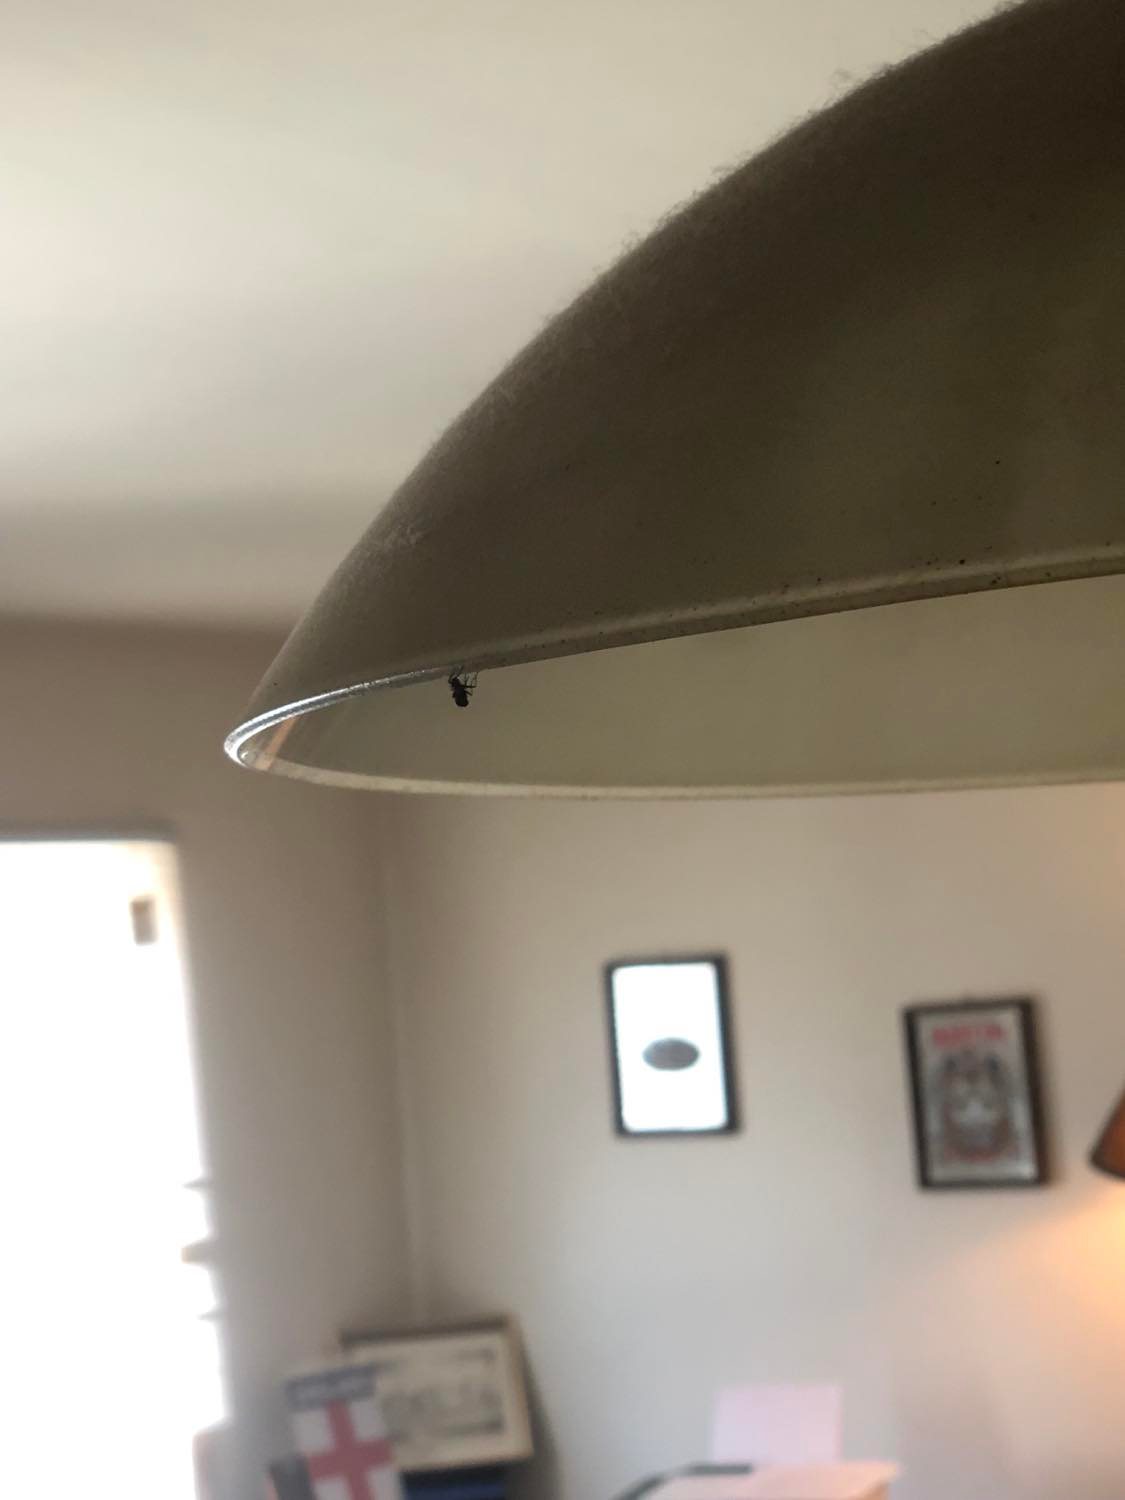 A fly hanging from the edge of a lampshade.